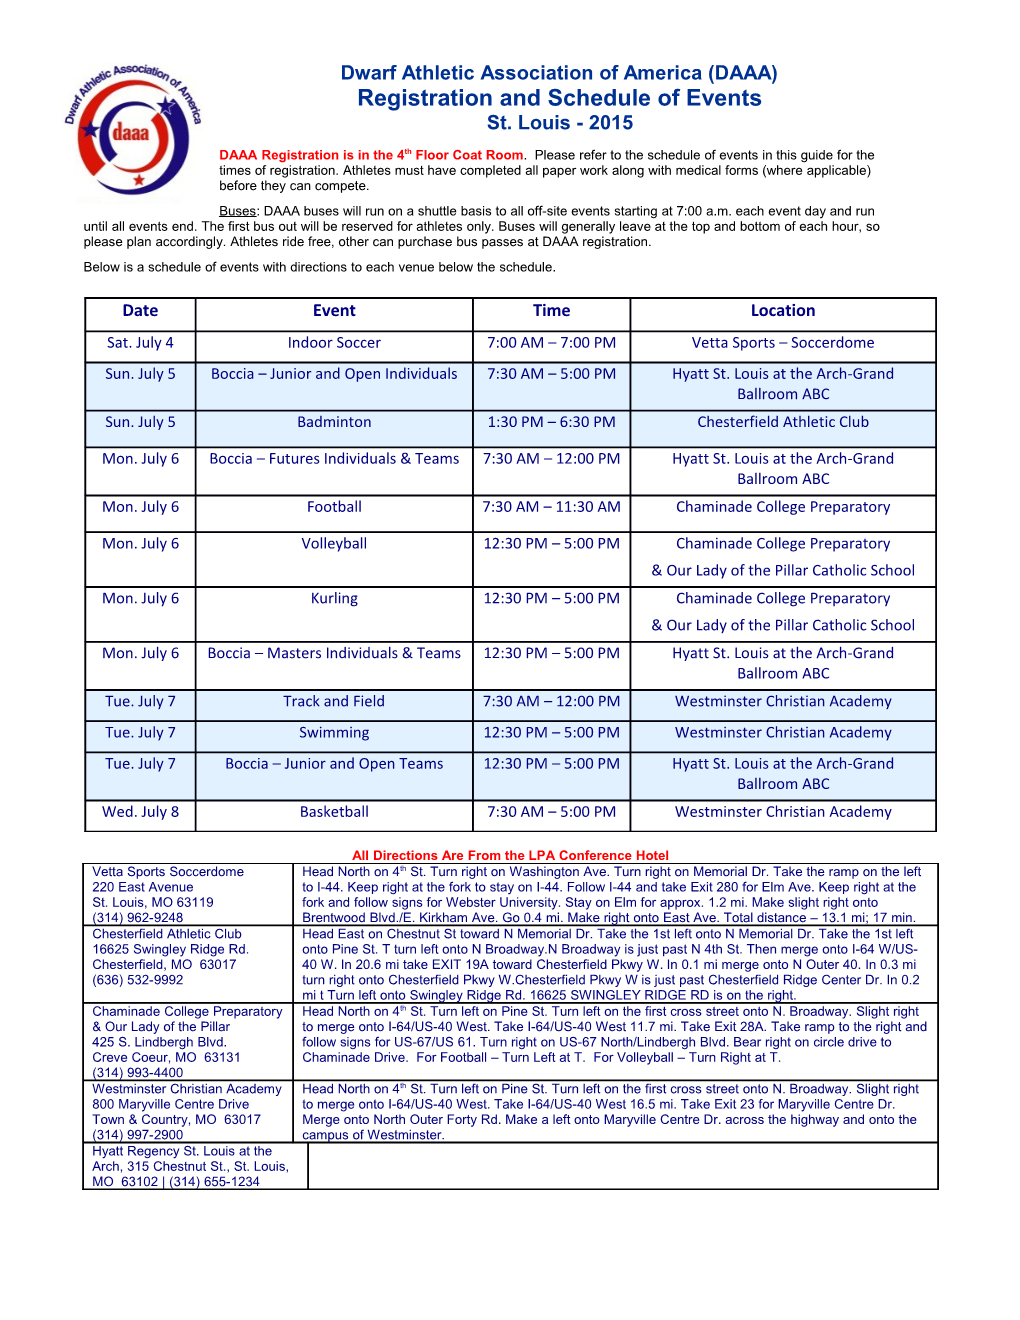 Registration and Schedule of Events